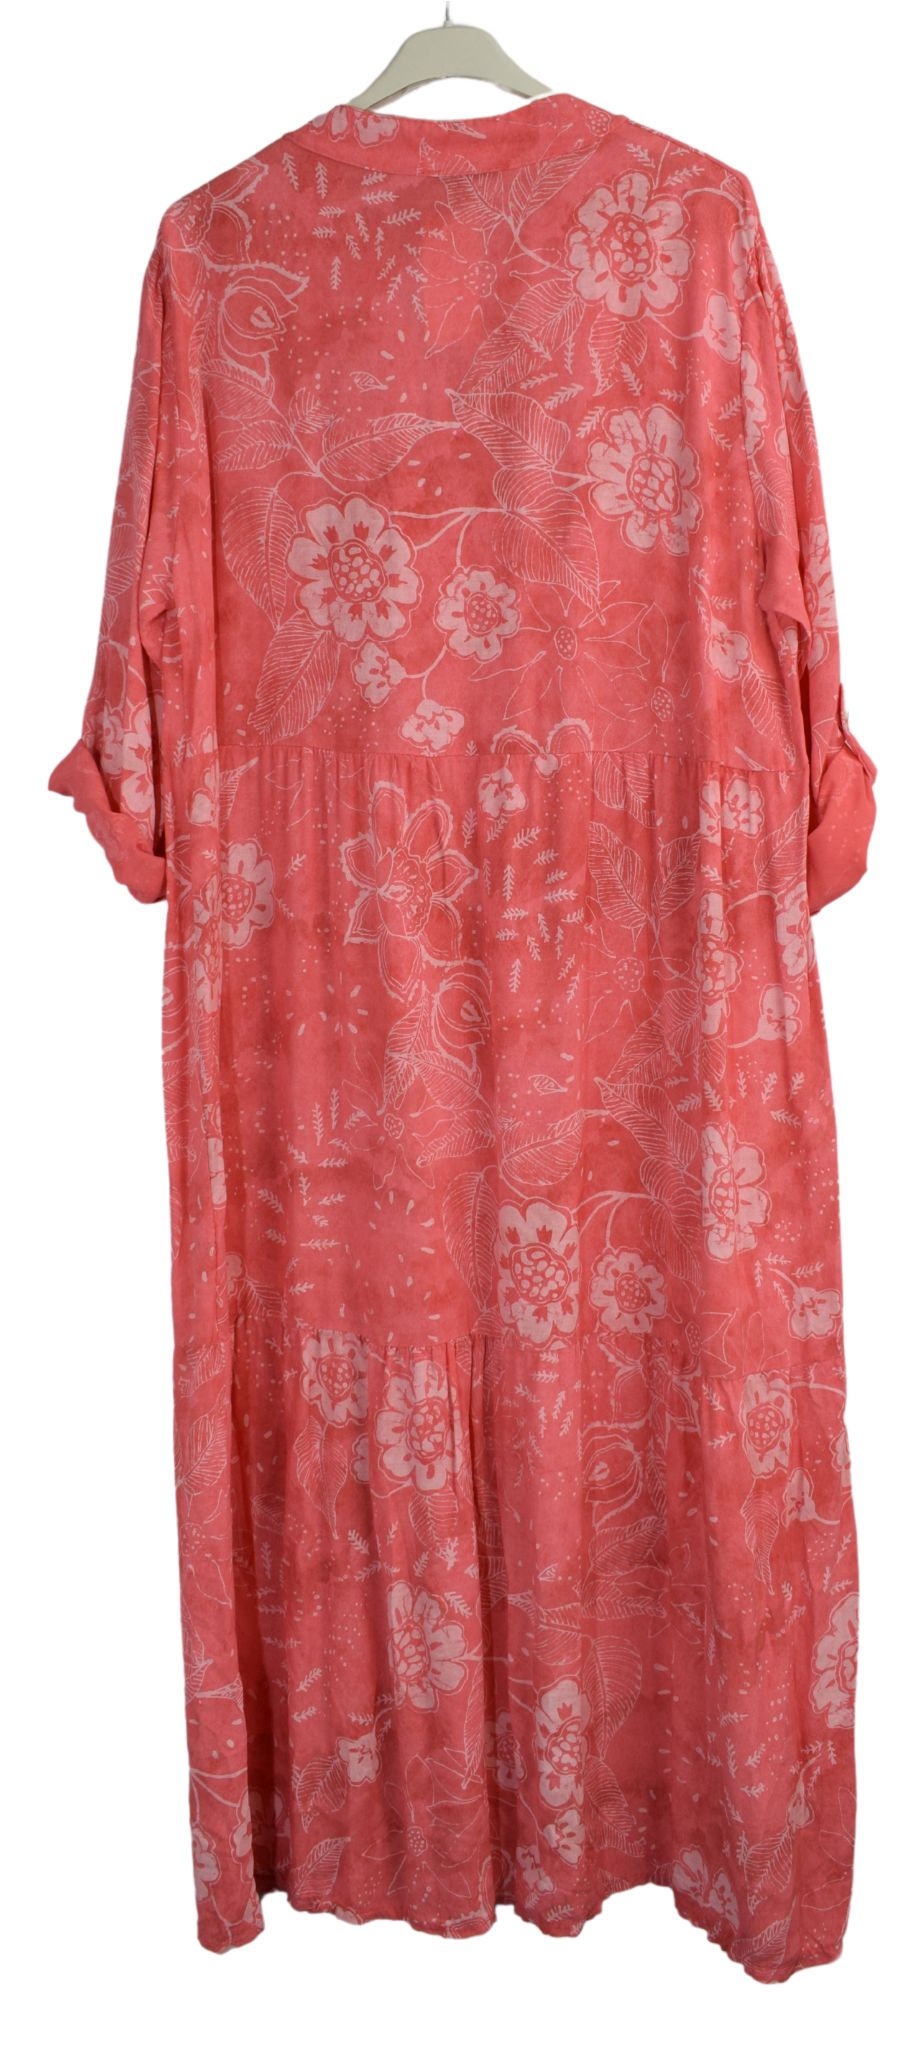 Floral Maxi Dress with Sequin Pocket and Neckline Lightweight Casual Women's Summer Dress